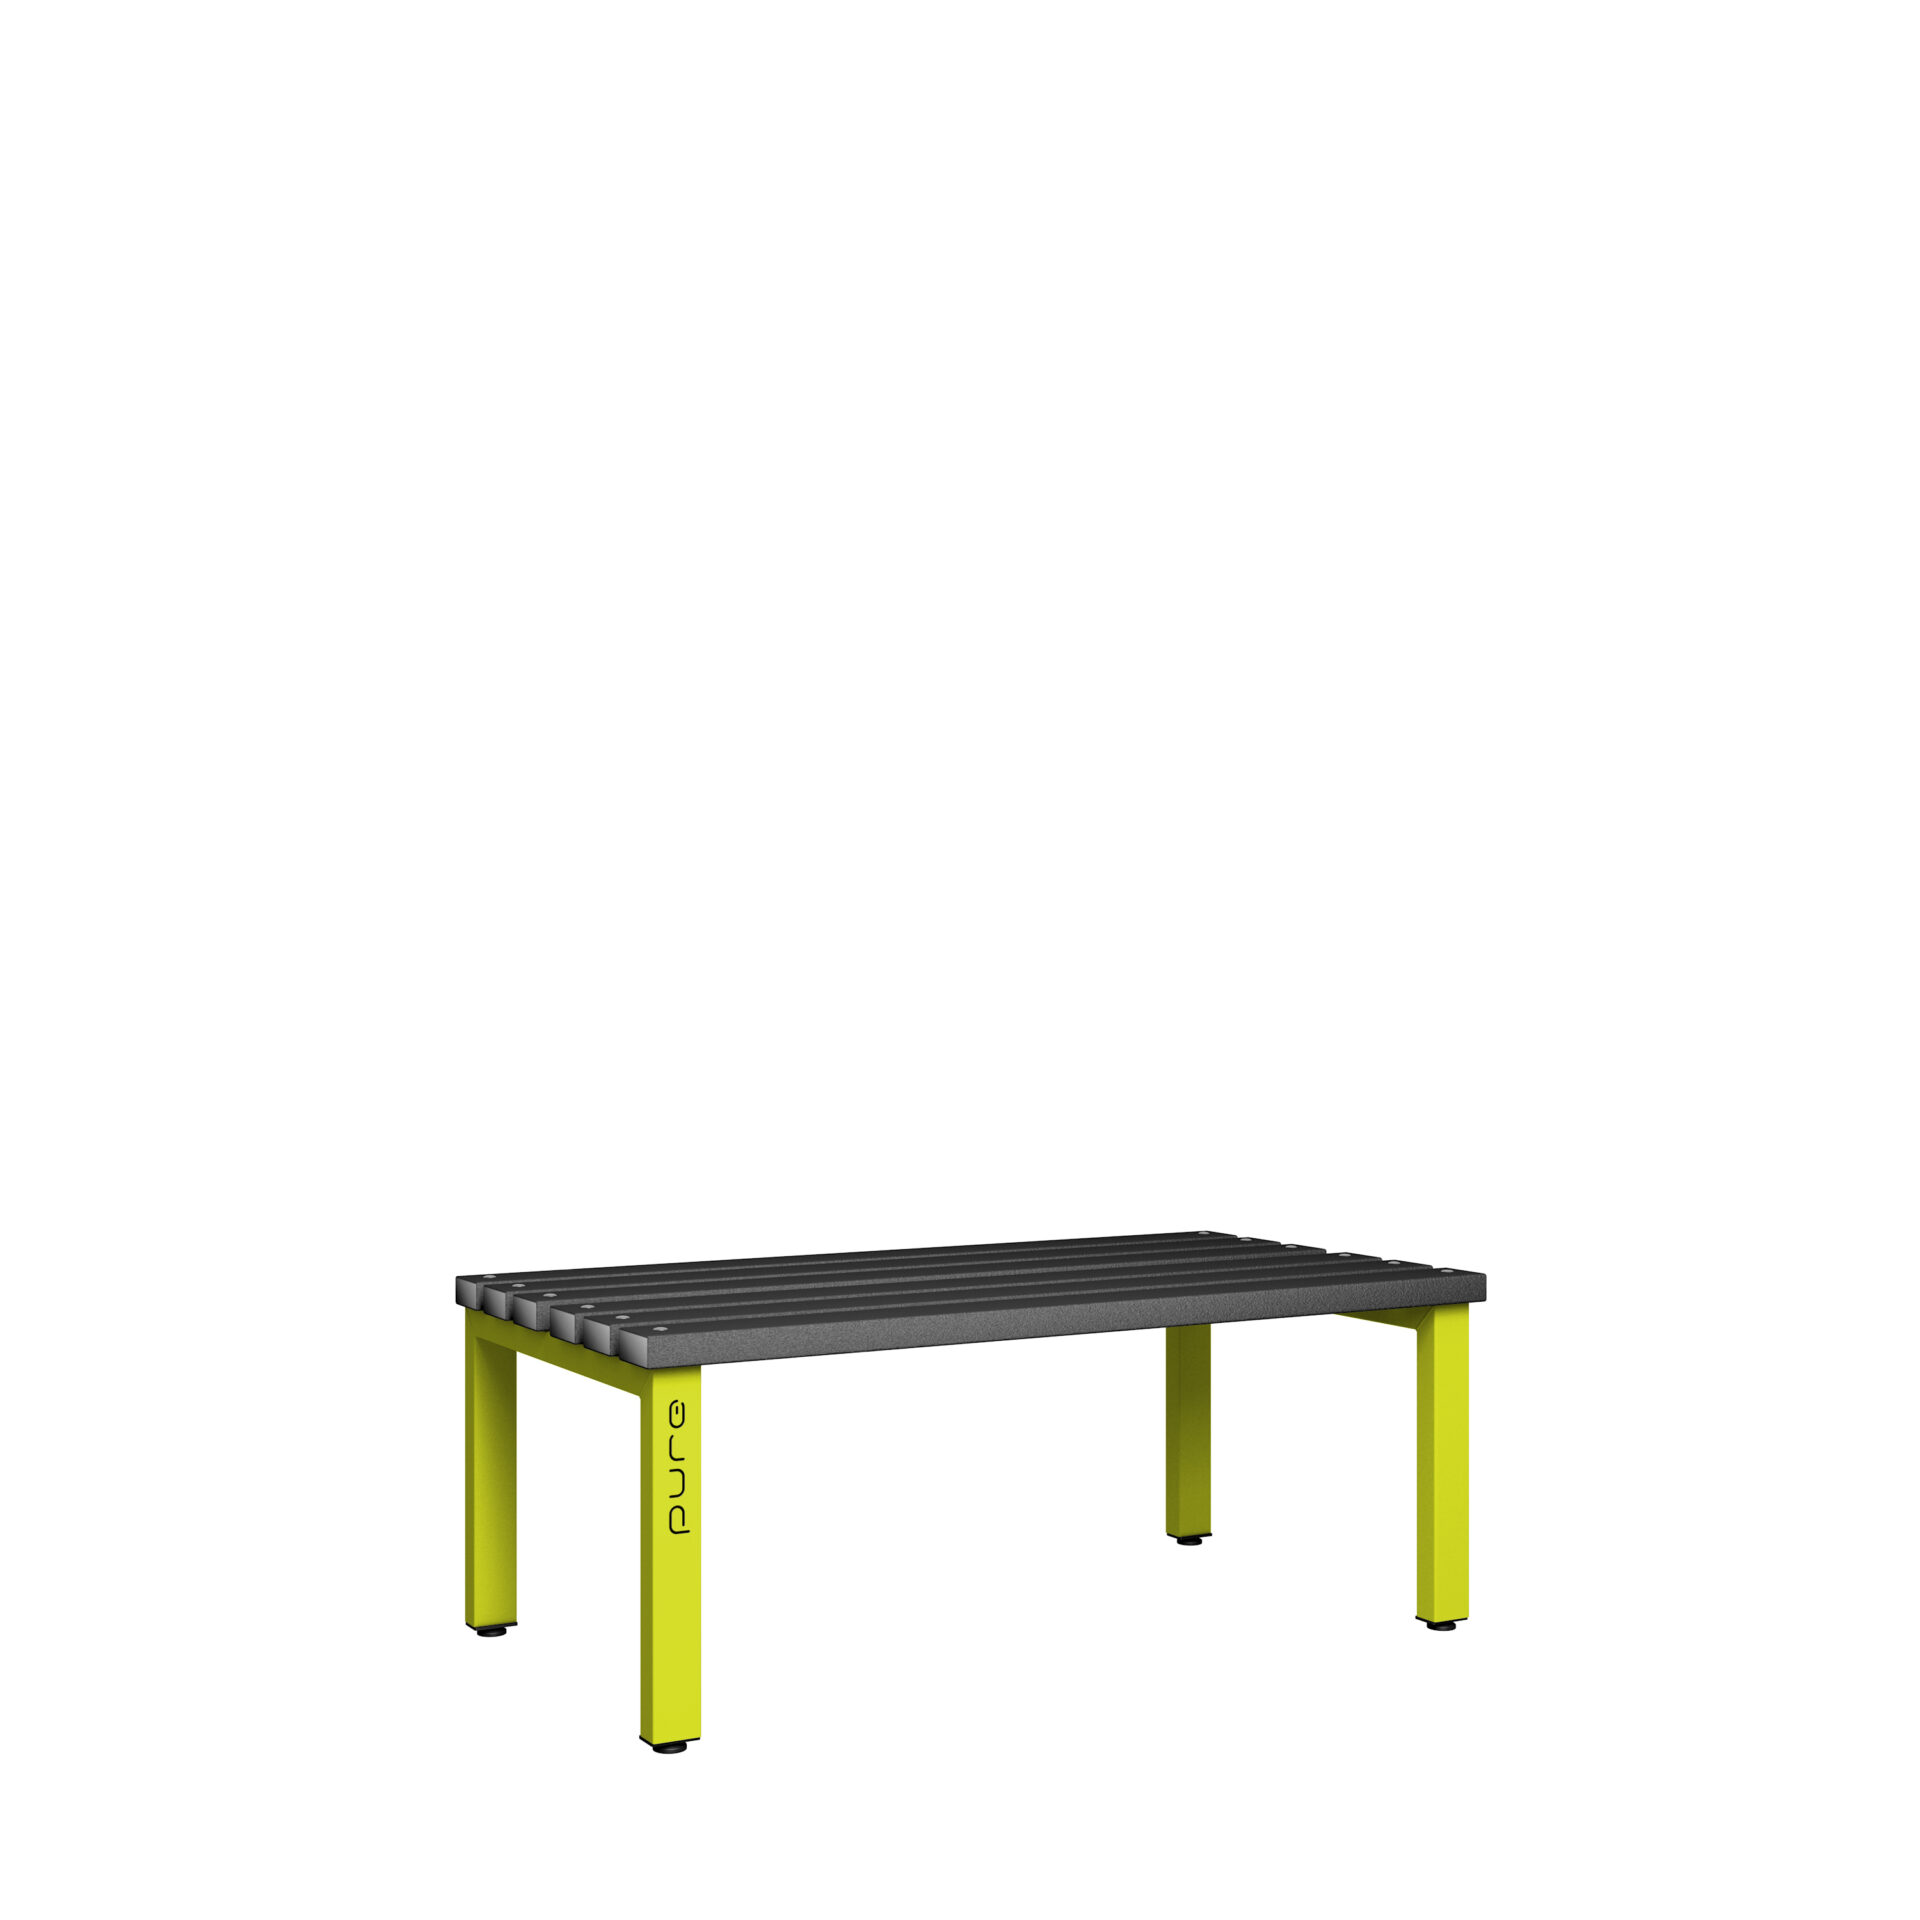 Pure Carbon Zero Double Sided 1200mm Standard Bench